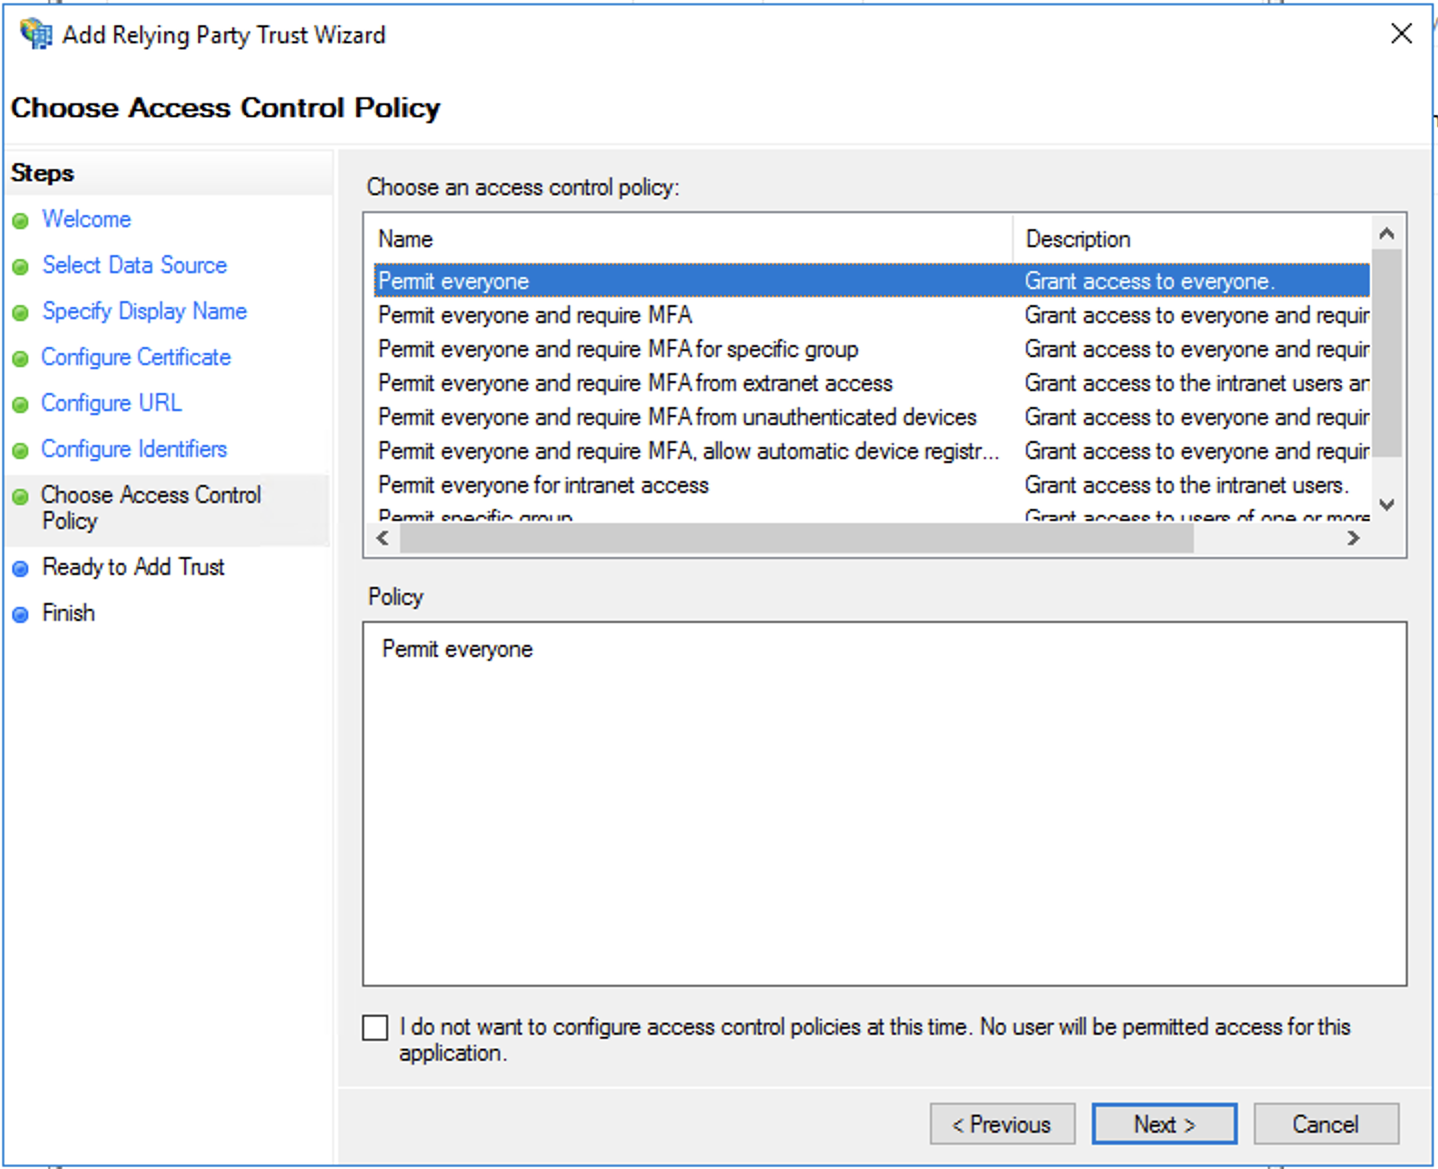 Add relying party trust wizard, choose access control policy step